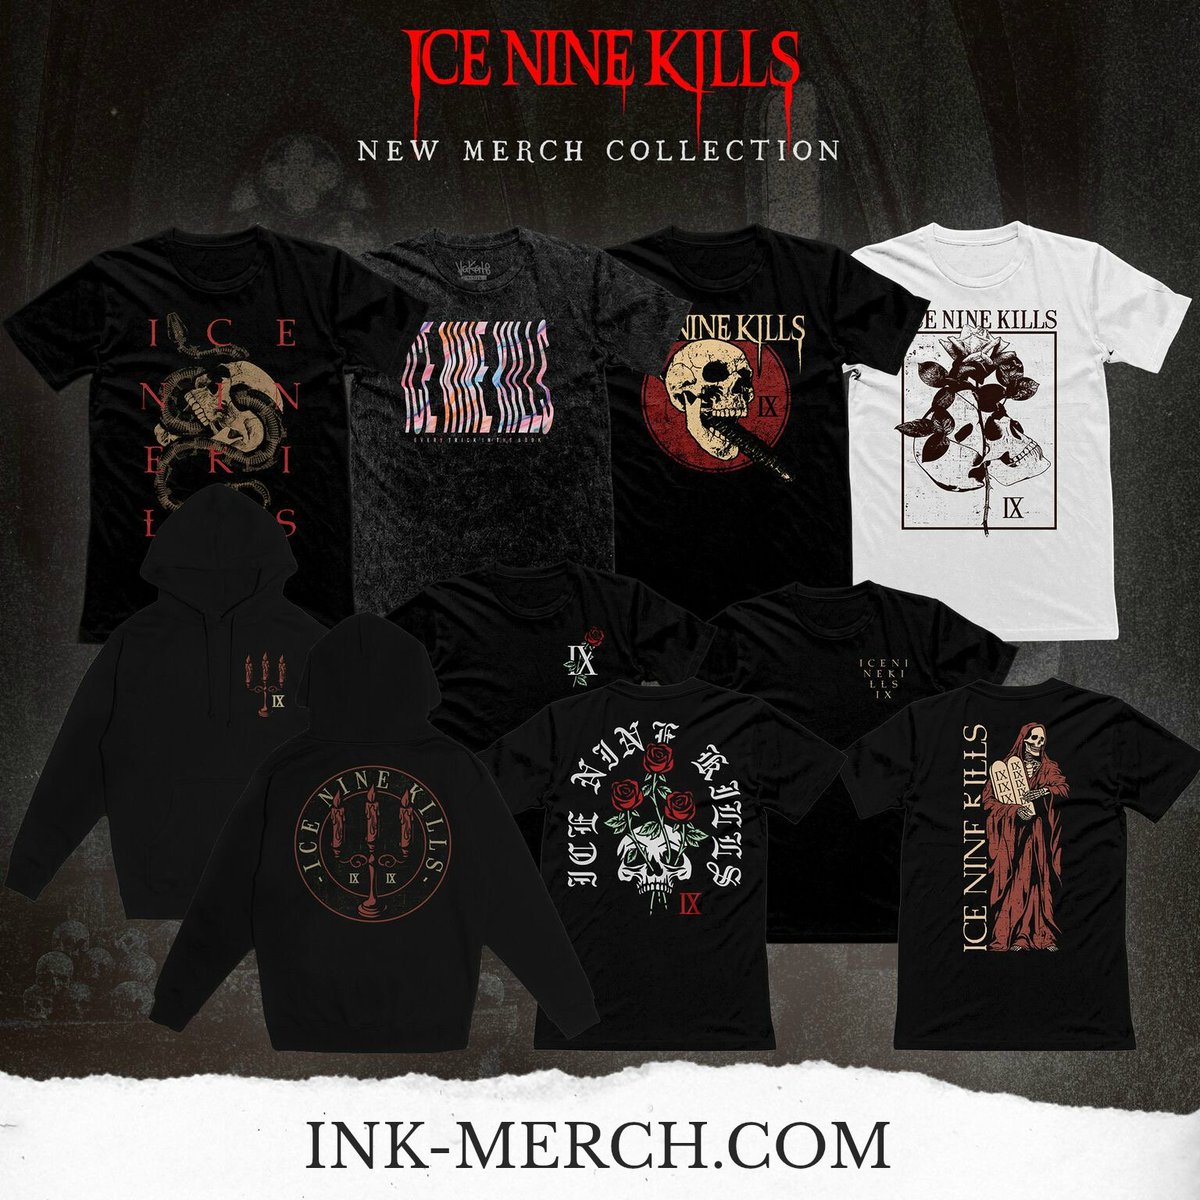 Ice Nine Kills Official Shop: The Home of Horror Merchandise